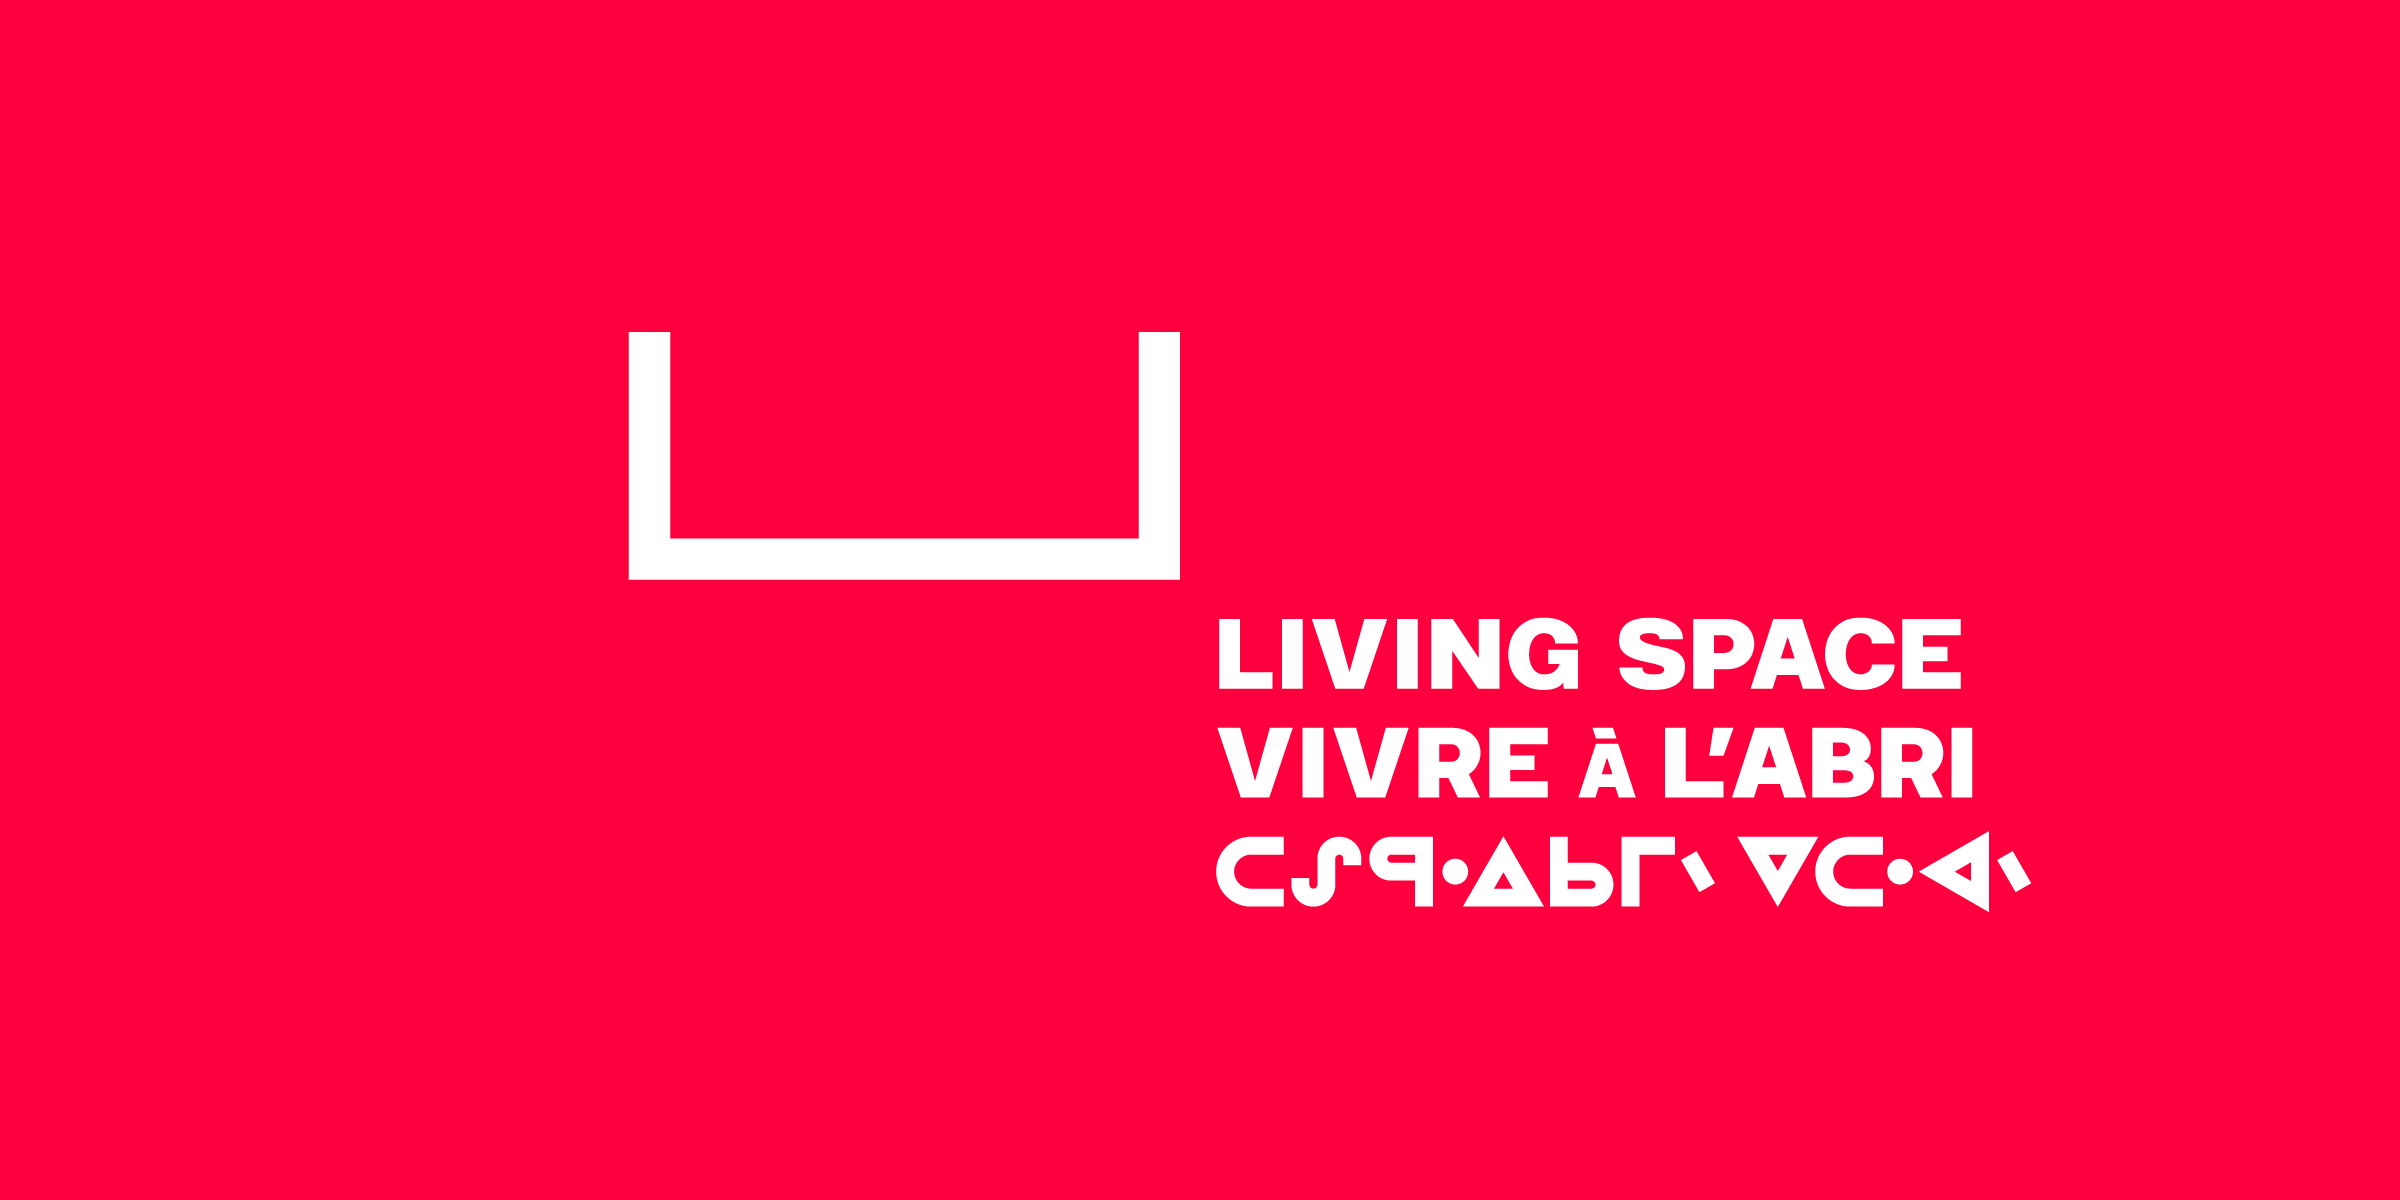 Trilingual branding for Living Space